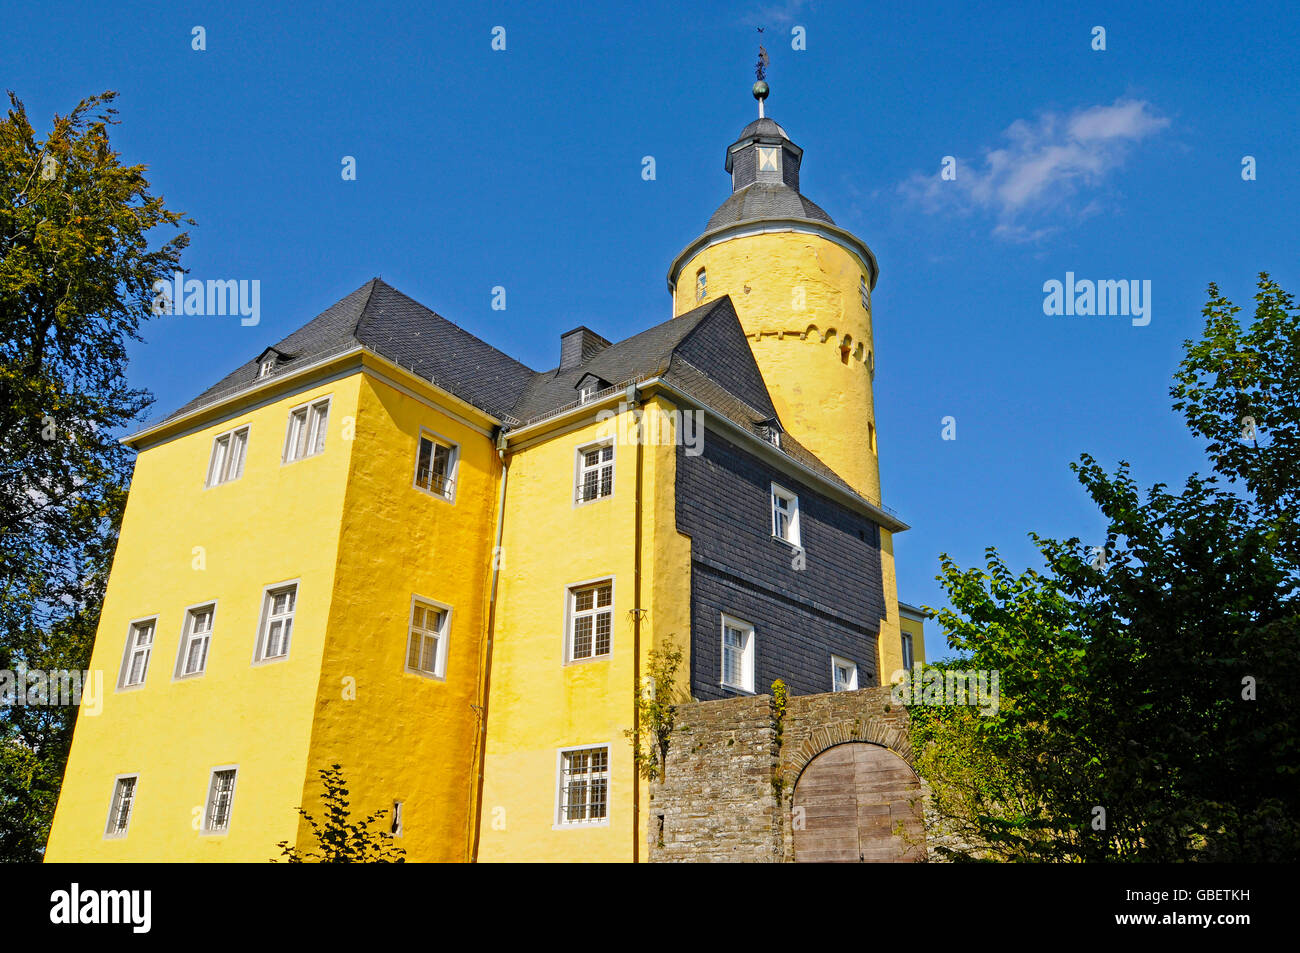 Sauerland Region High Resolution Stock Photography and Images - Alamy